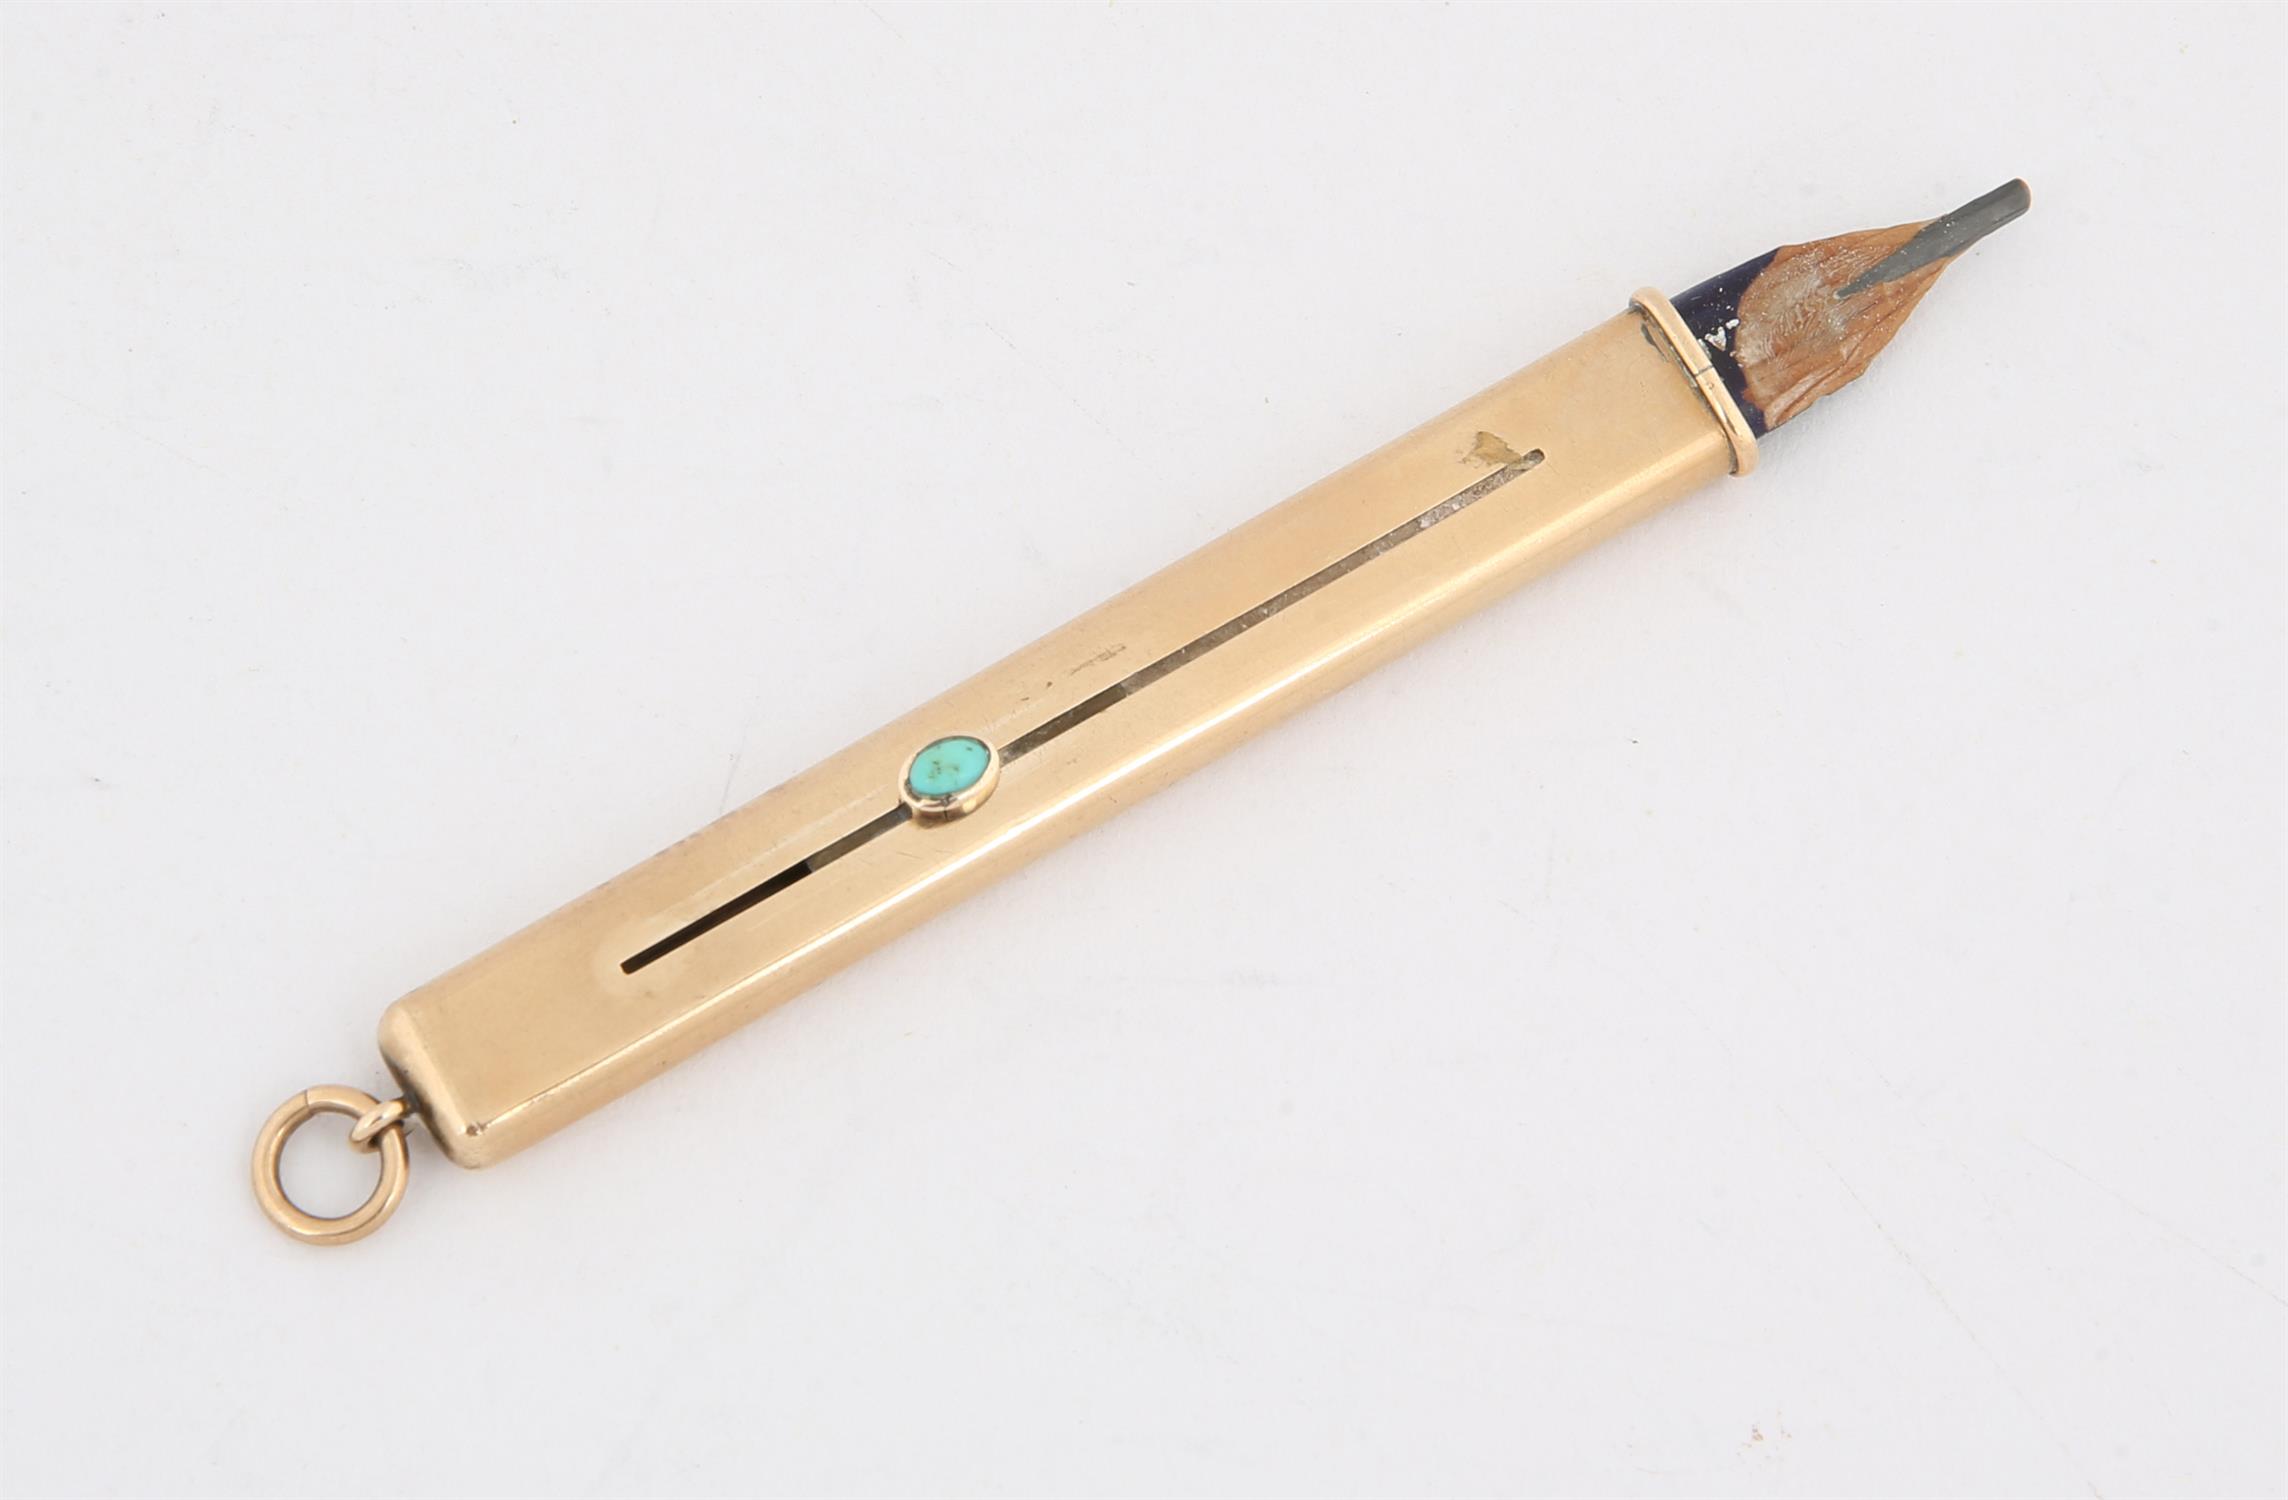 9 carat gold pencil holder with turquoise set stud to slider, gross weight inc. pencil 8.